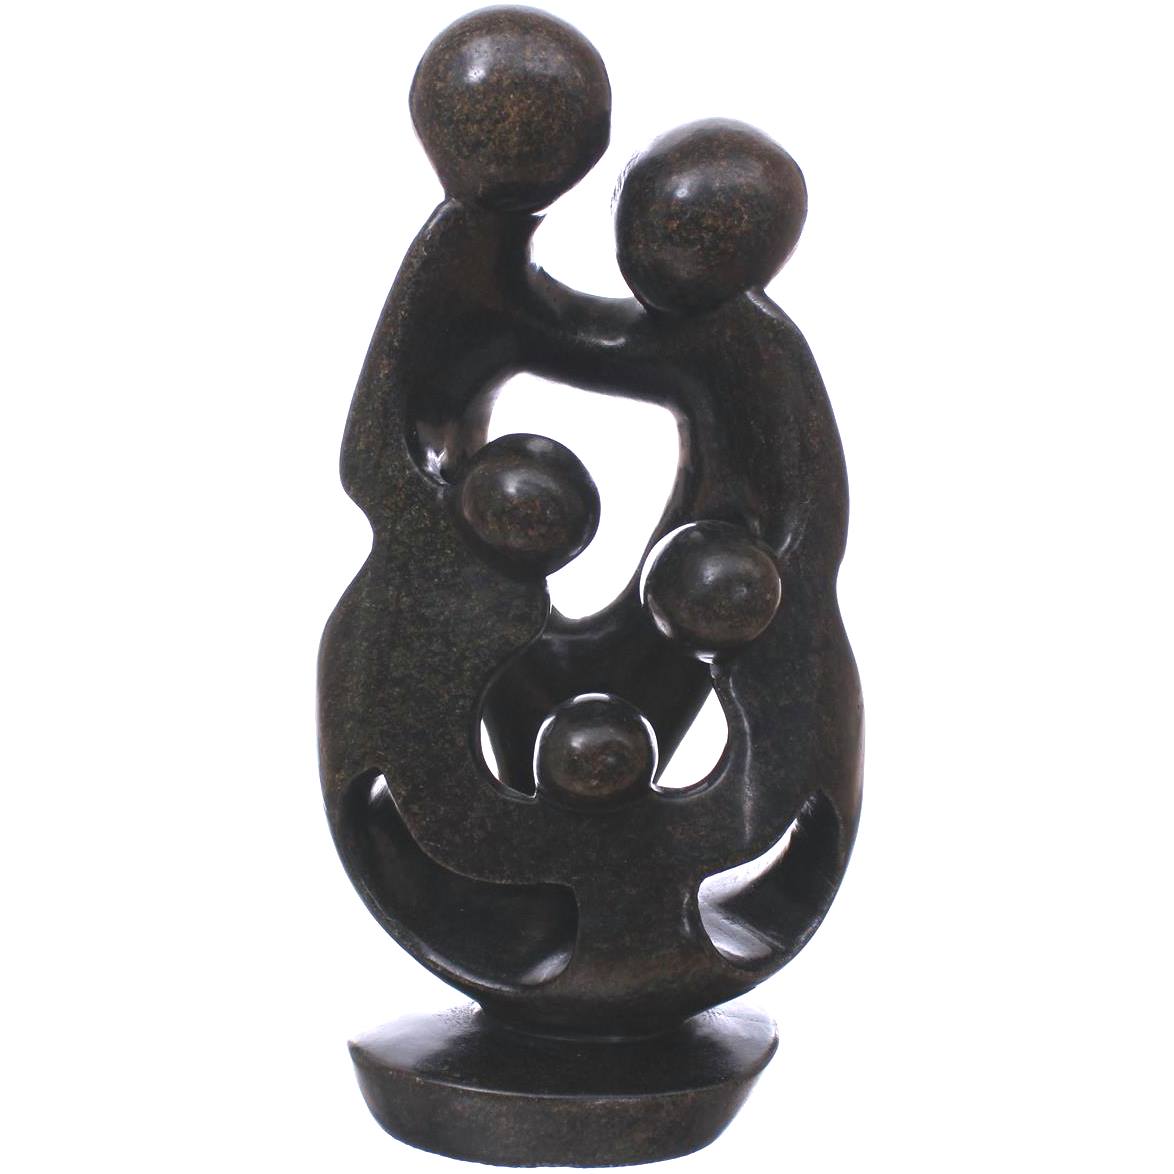 Shona Tribe Serpentine Stone Family of Five ~7.9" Tall - Family of Five